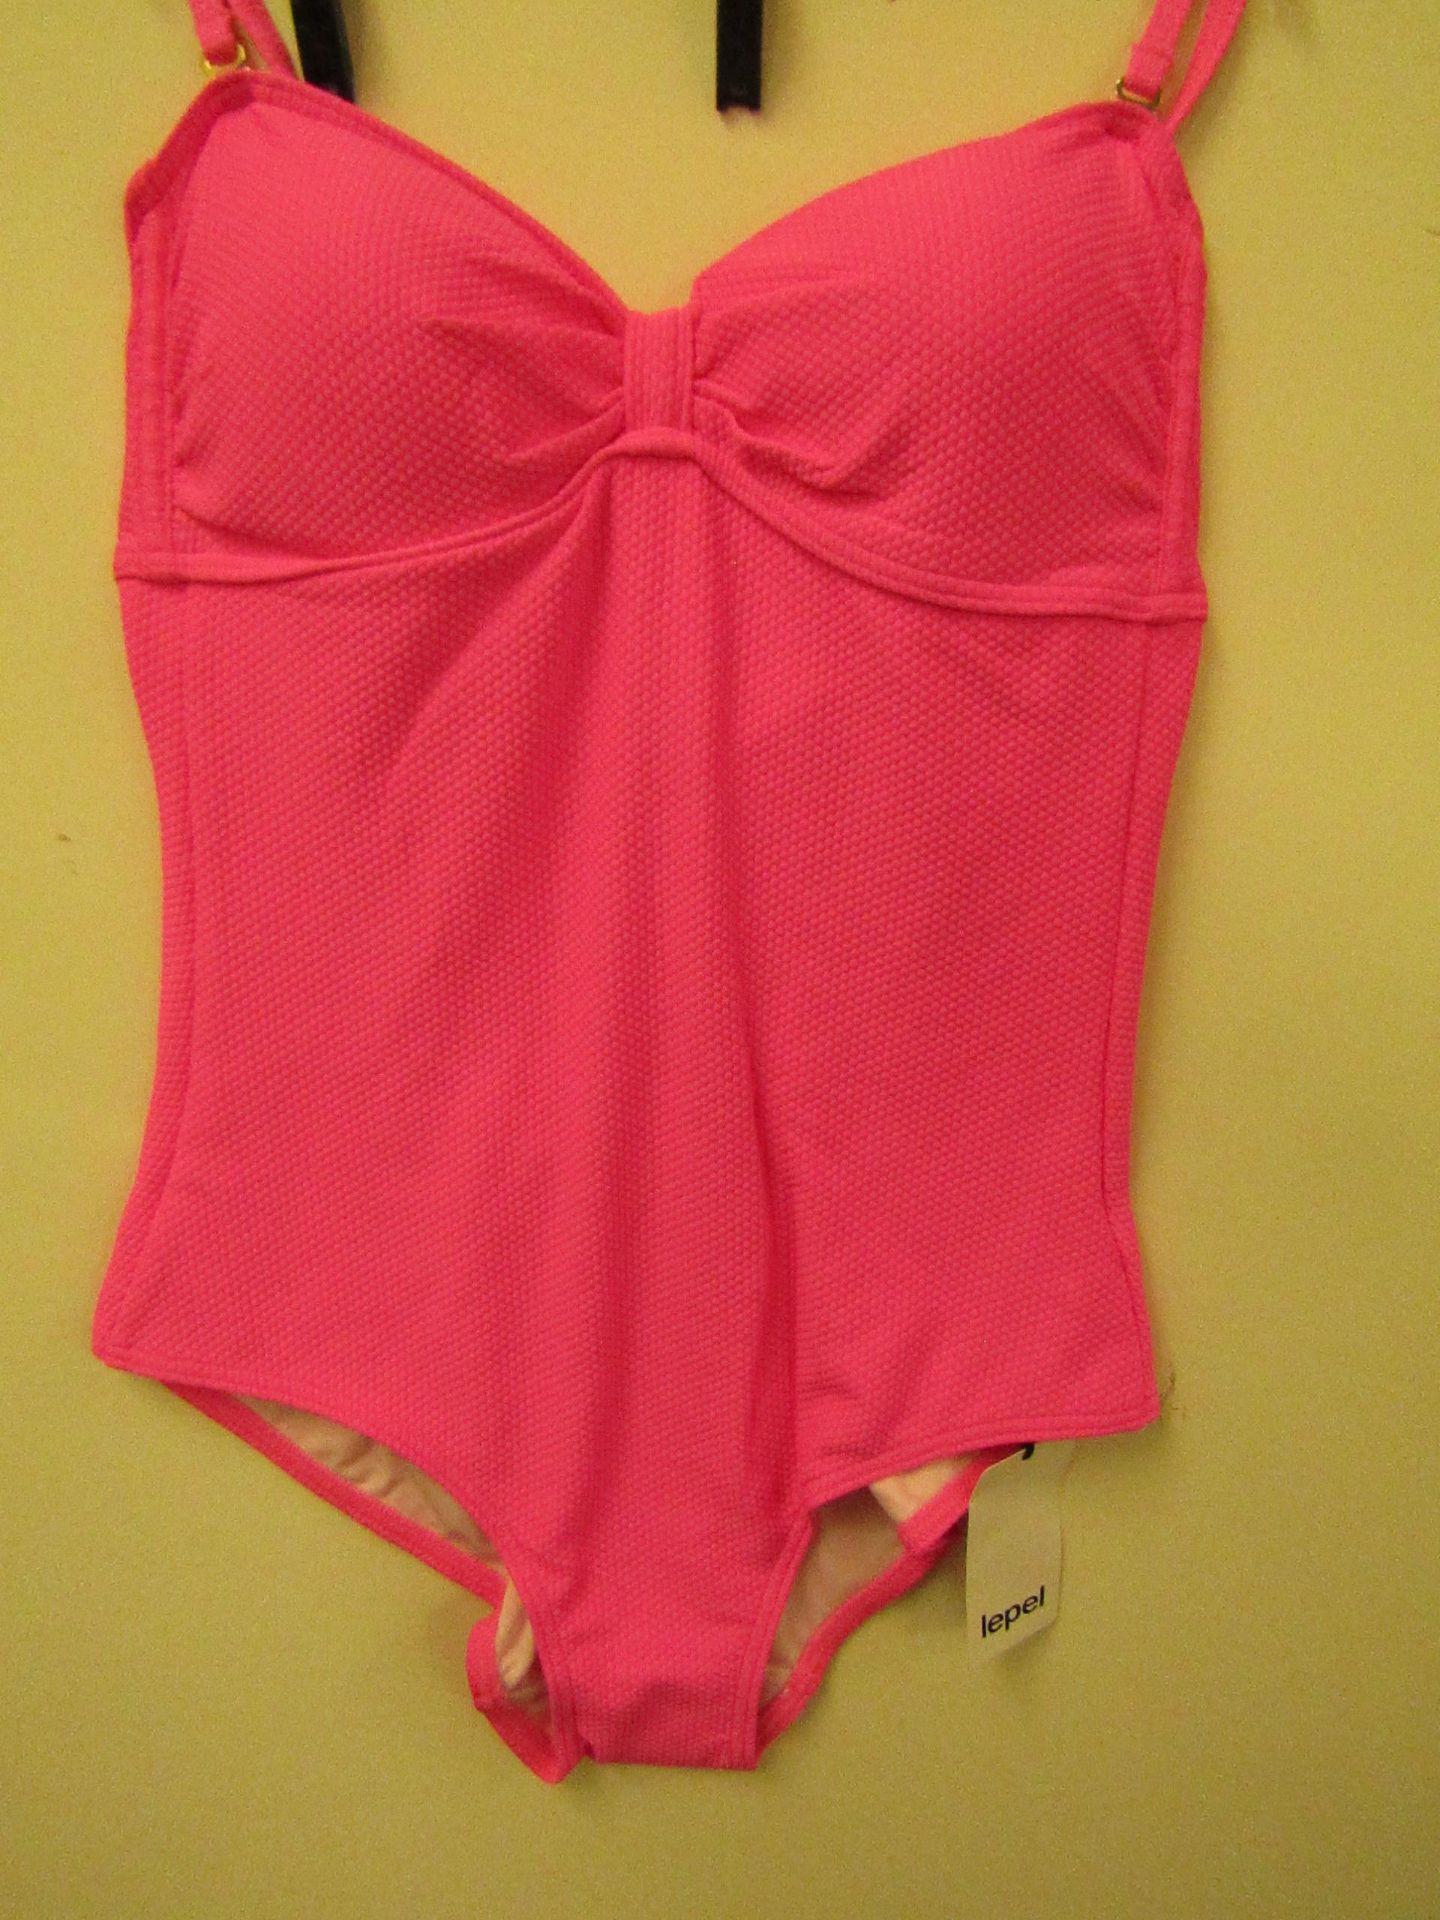 Lepel Ladies Swimming Costume Bright Pink Size 14 New & Packaged